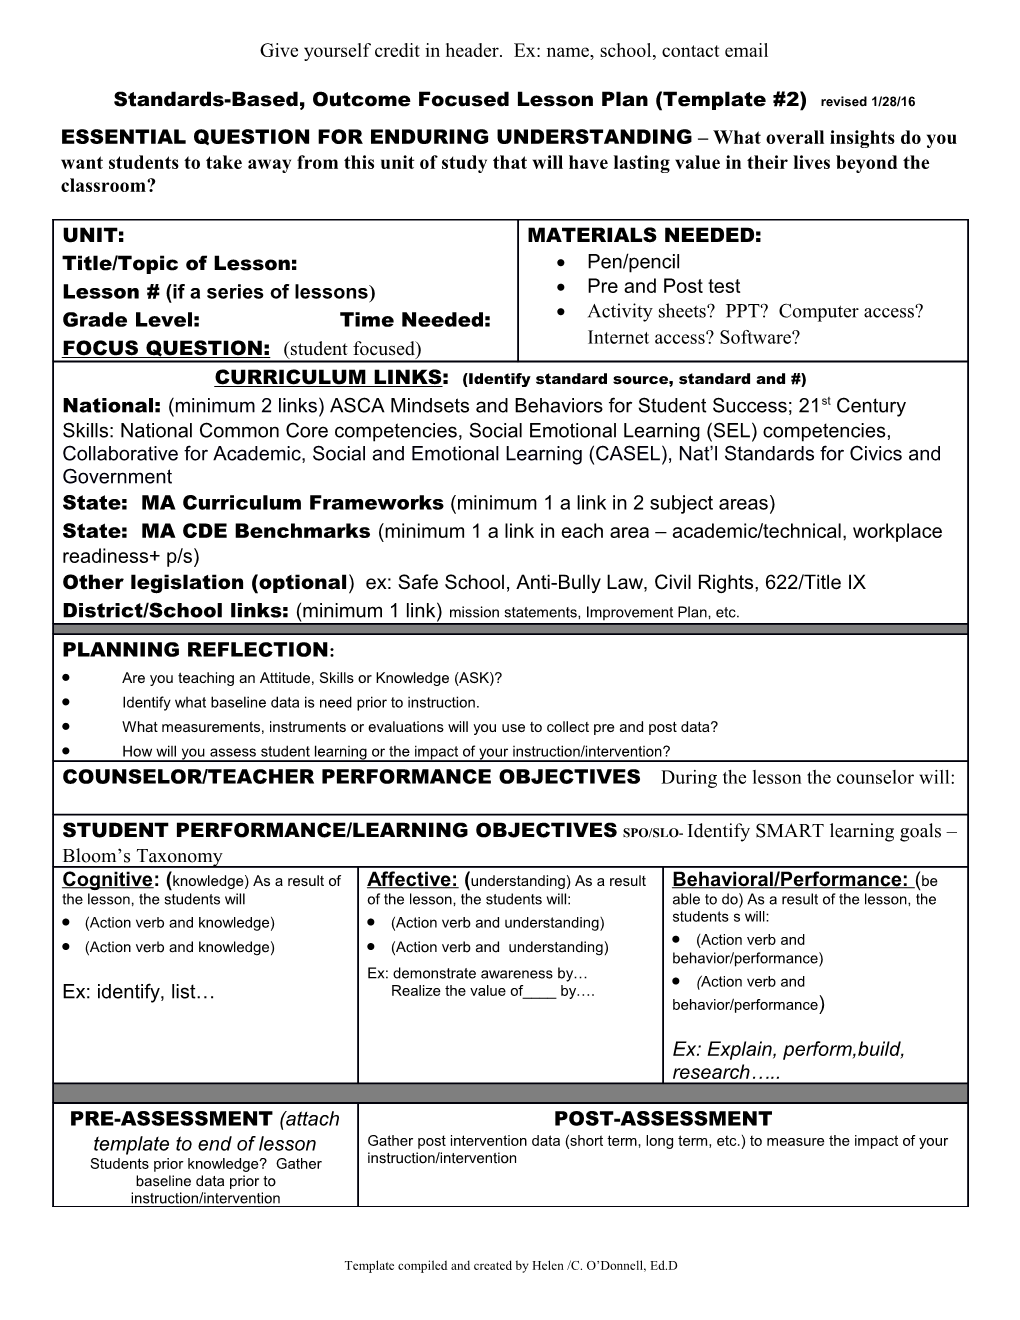 Standards-Based, Outcome Focused Lesson Plan (Template #2) Revised 1/28/16